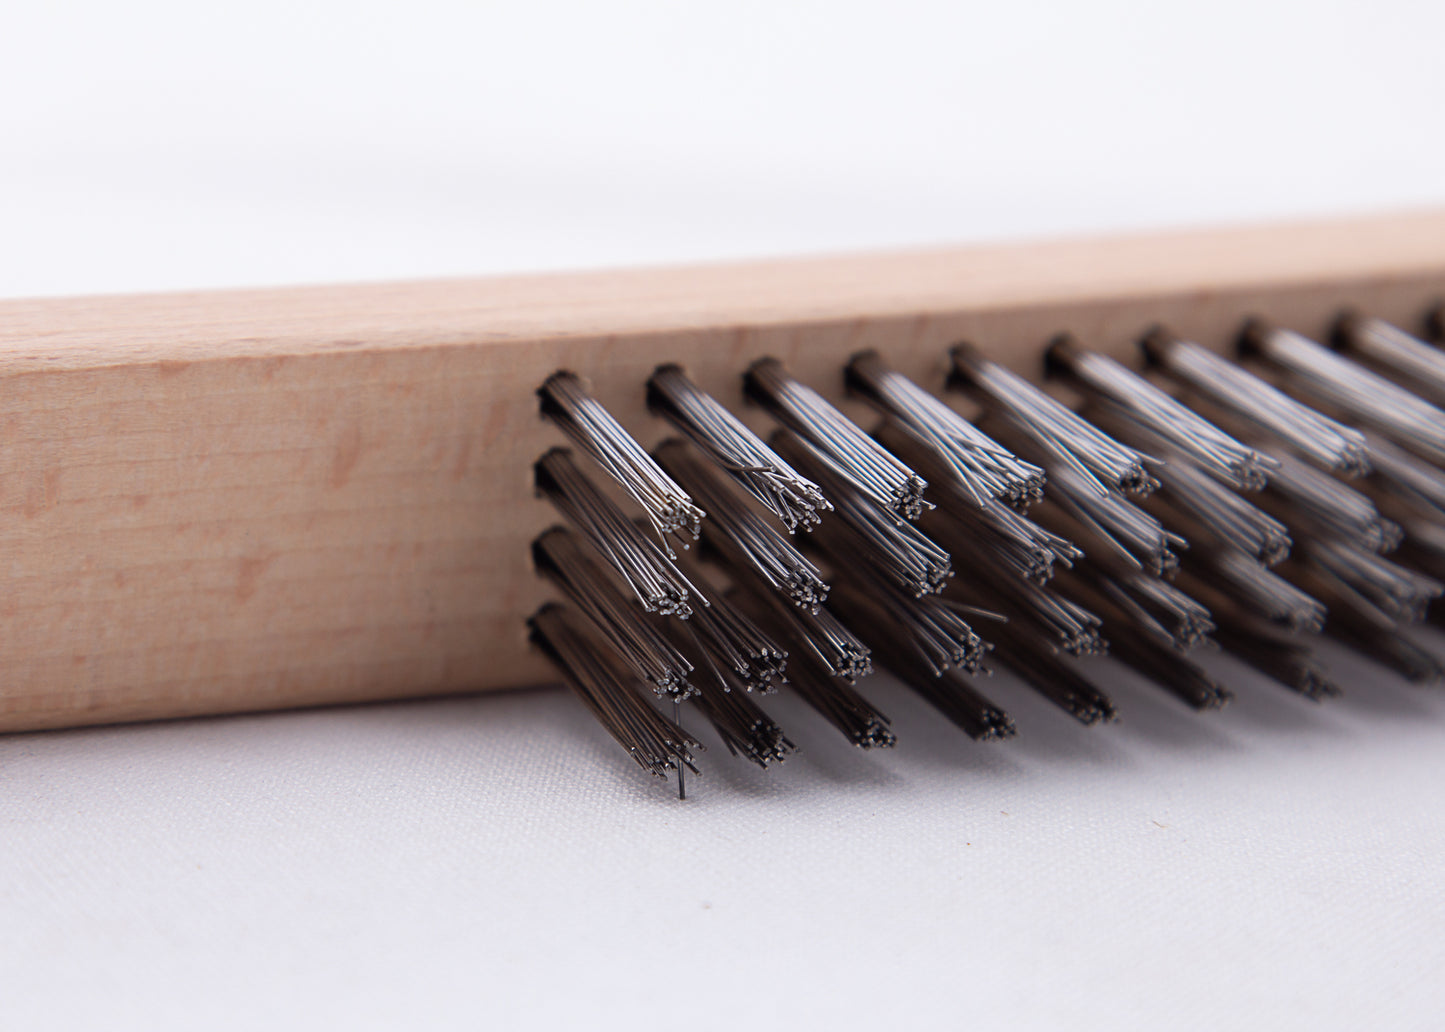 4 rows of bristles on the wire brush with curved handle